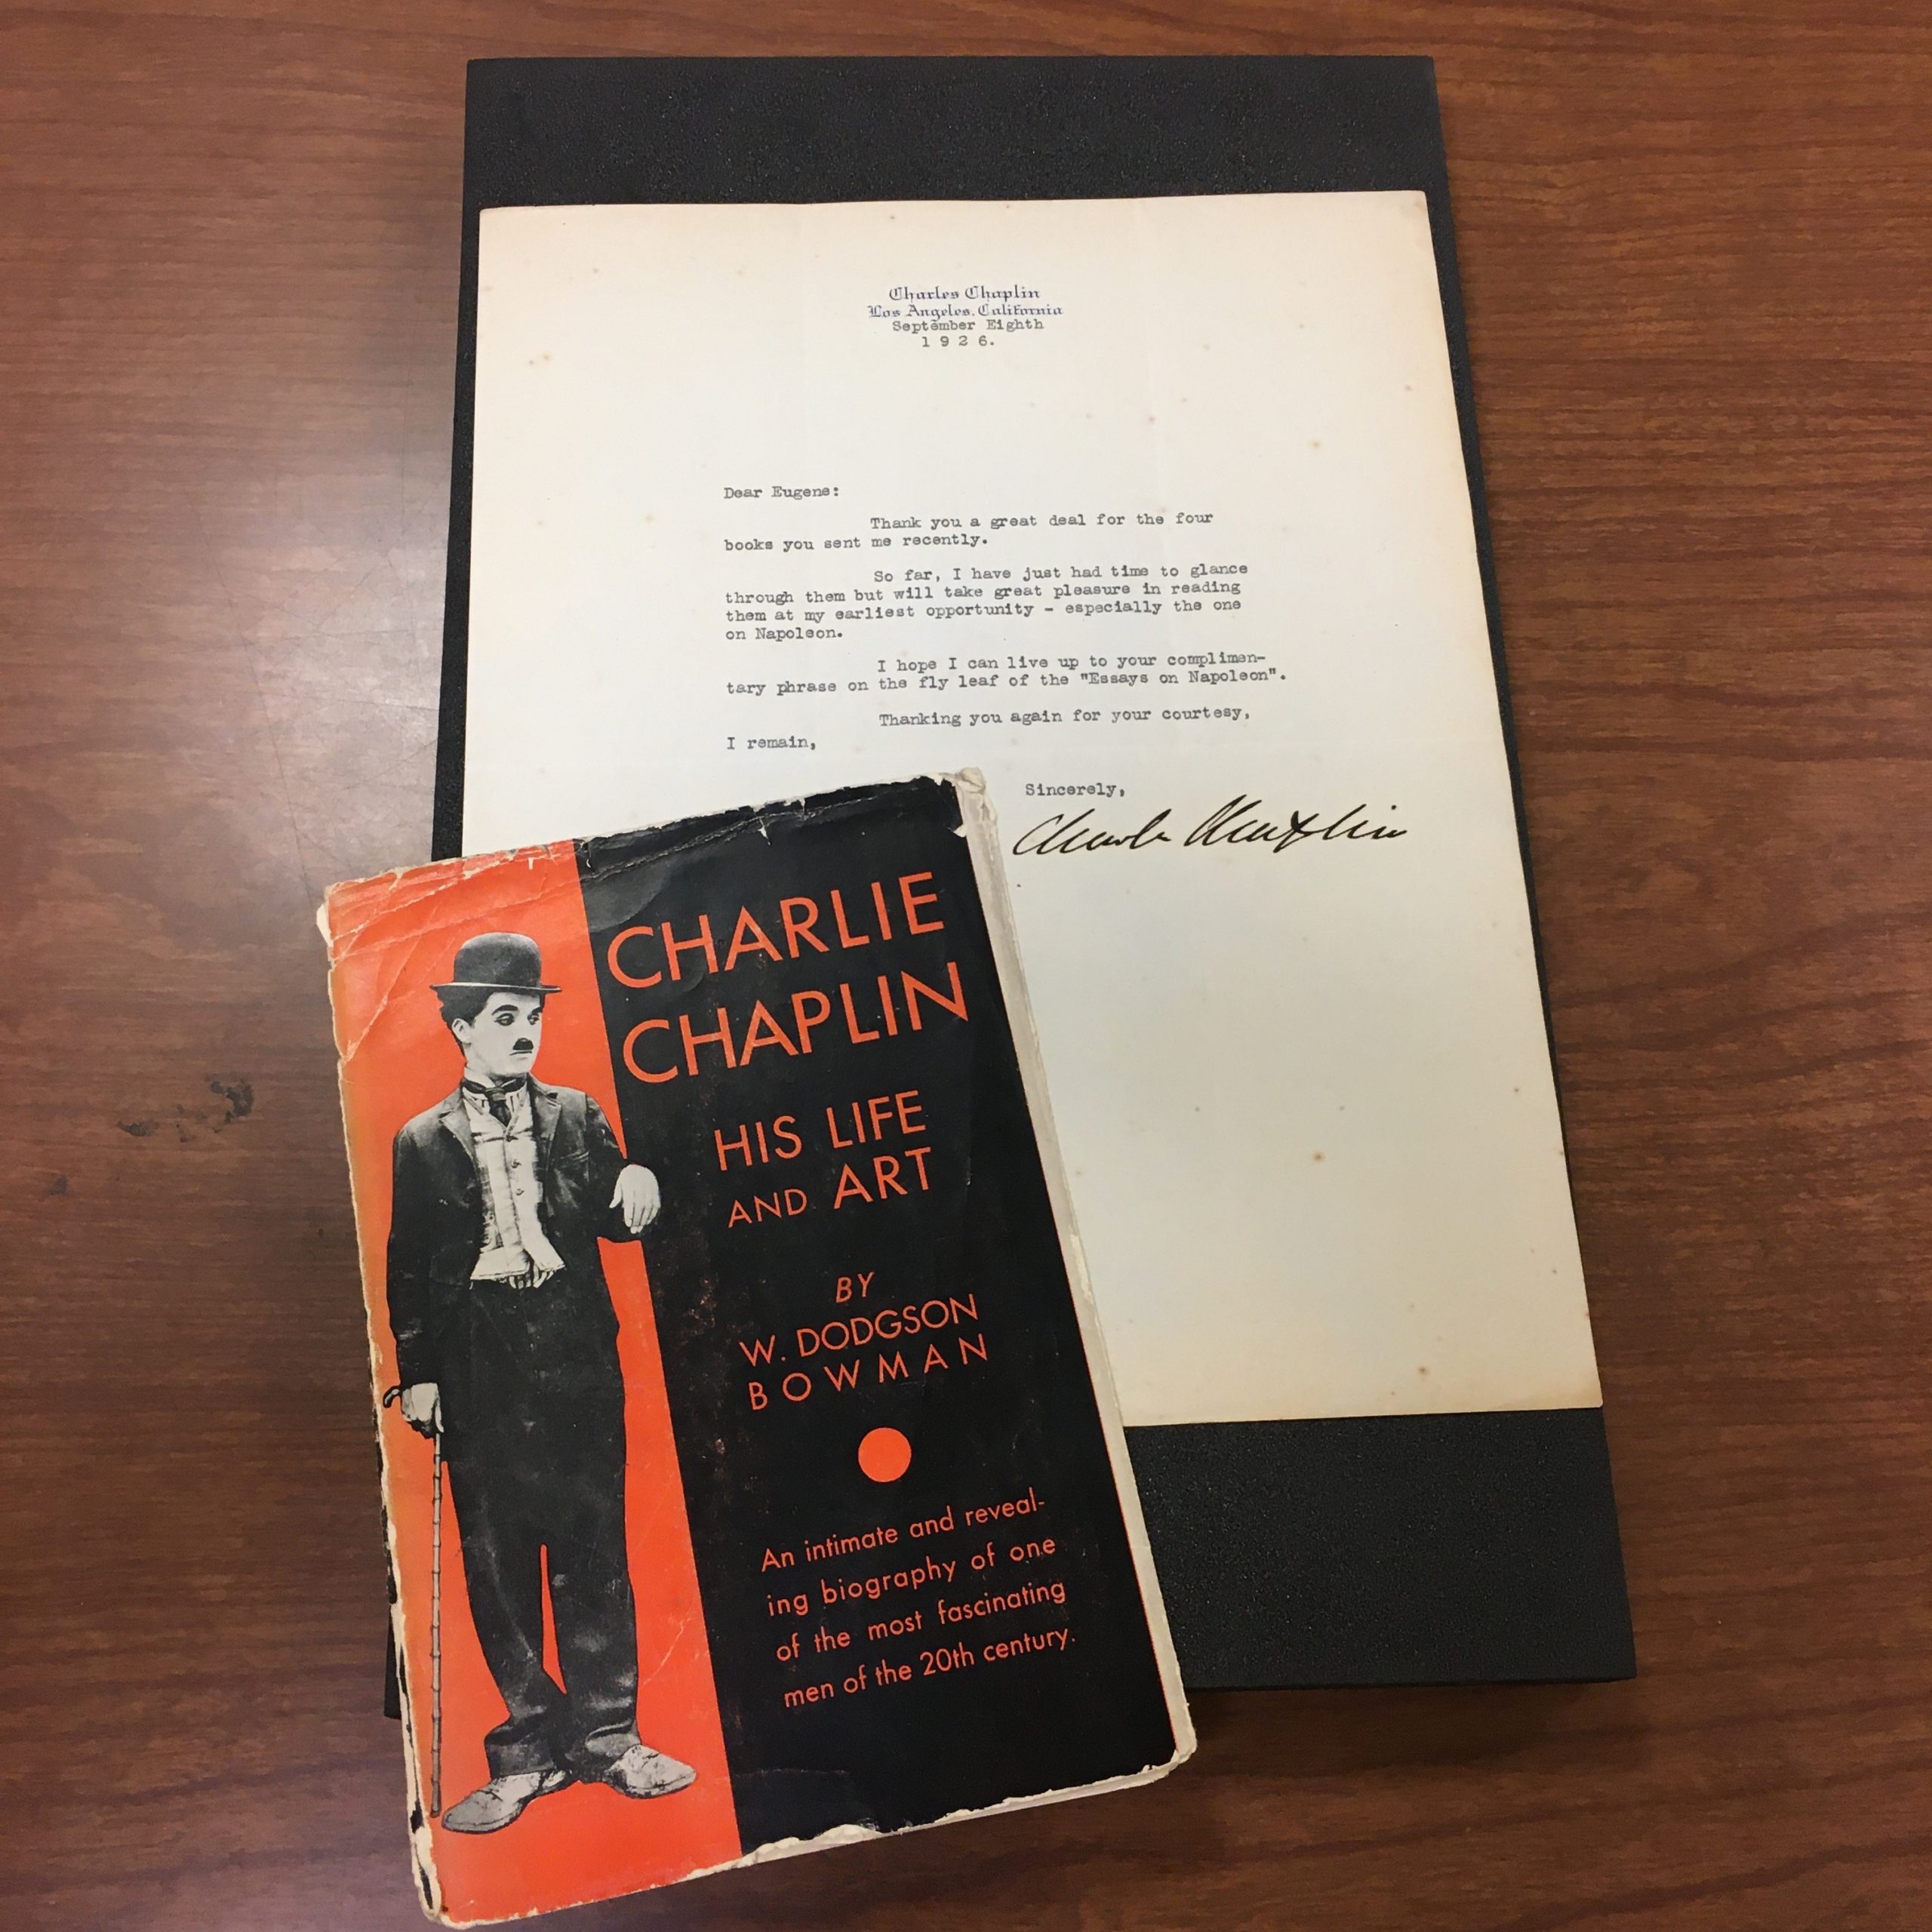 A letter addressed to Mr. Wolfe from Charlie Chaplin. With the letter is a copy of the book, "Charlie Chaplin: His Life and Art" by Dodgson Bowman.